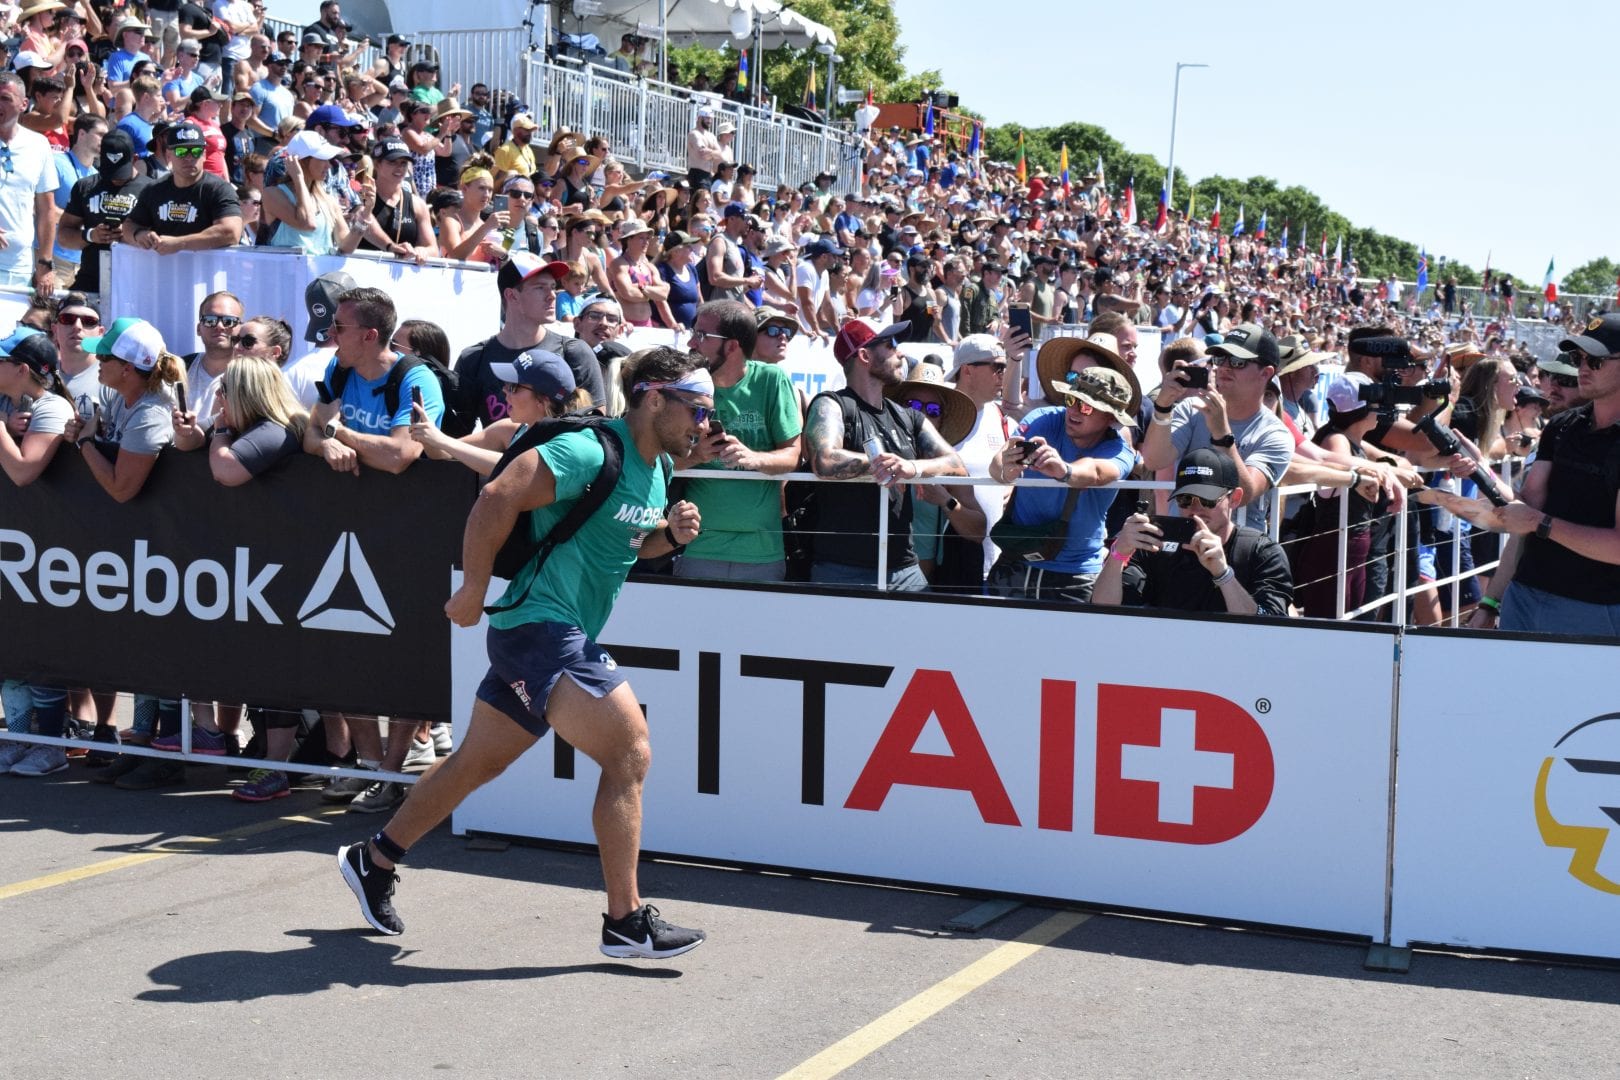 Will Moorad completes the Ruck Run event at the 2019 CrossFit Games